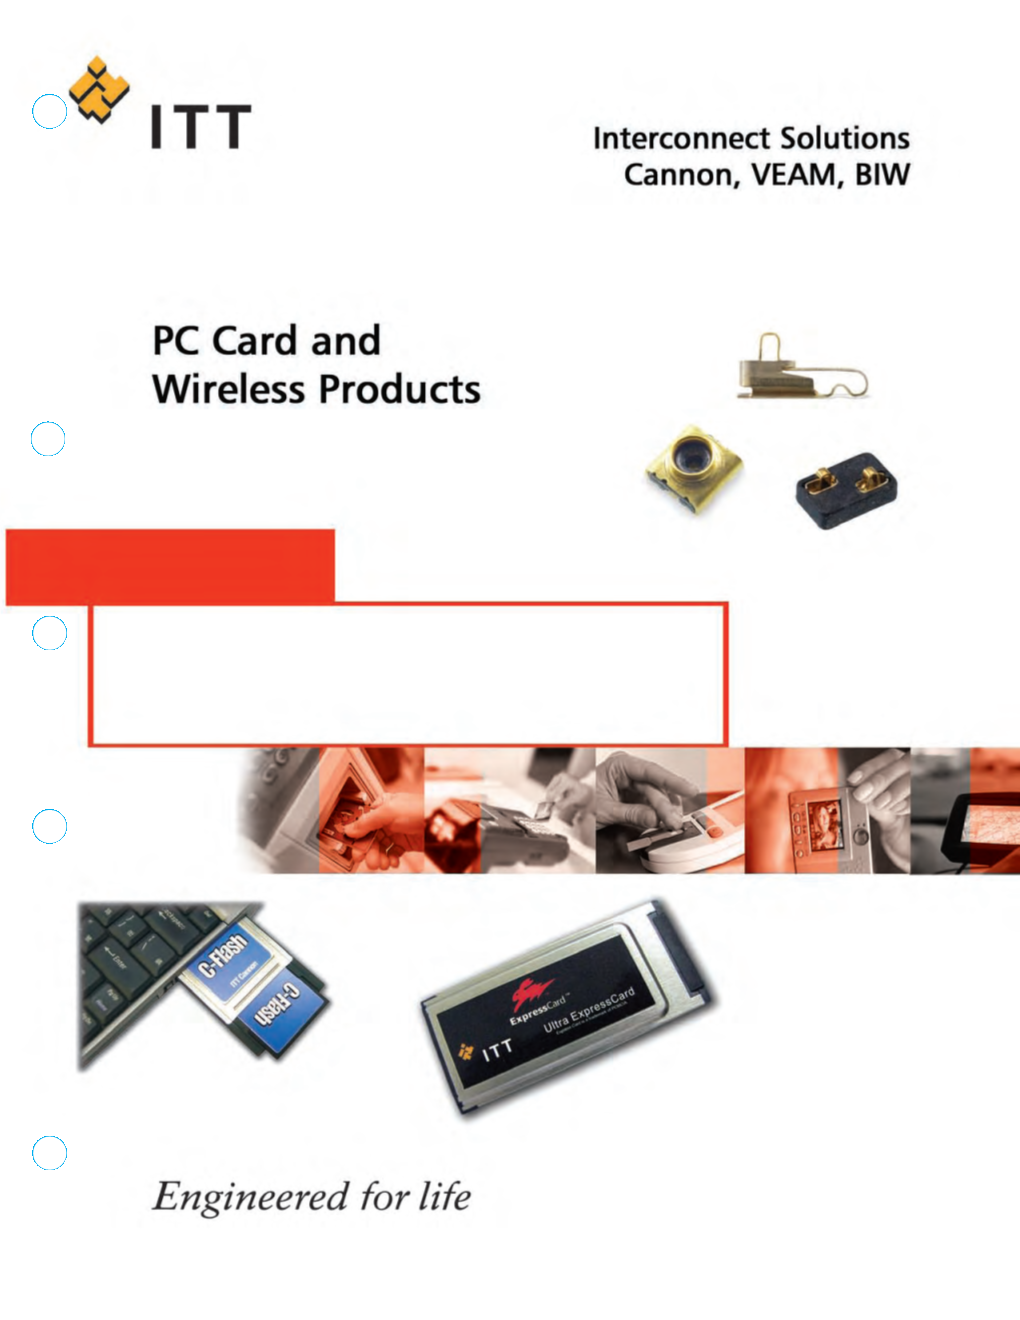 PC Card and Wireless Products Brochure